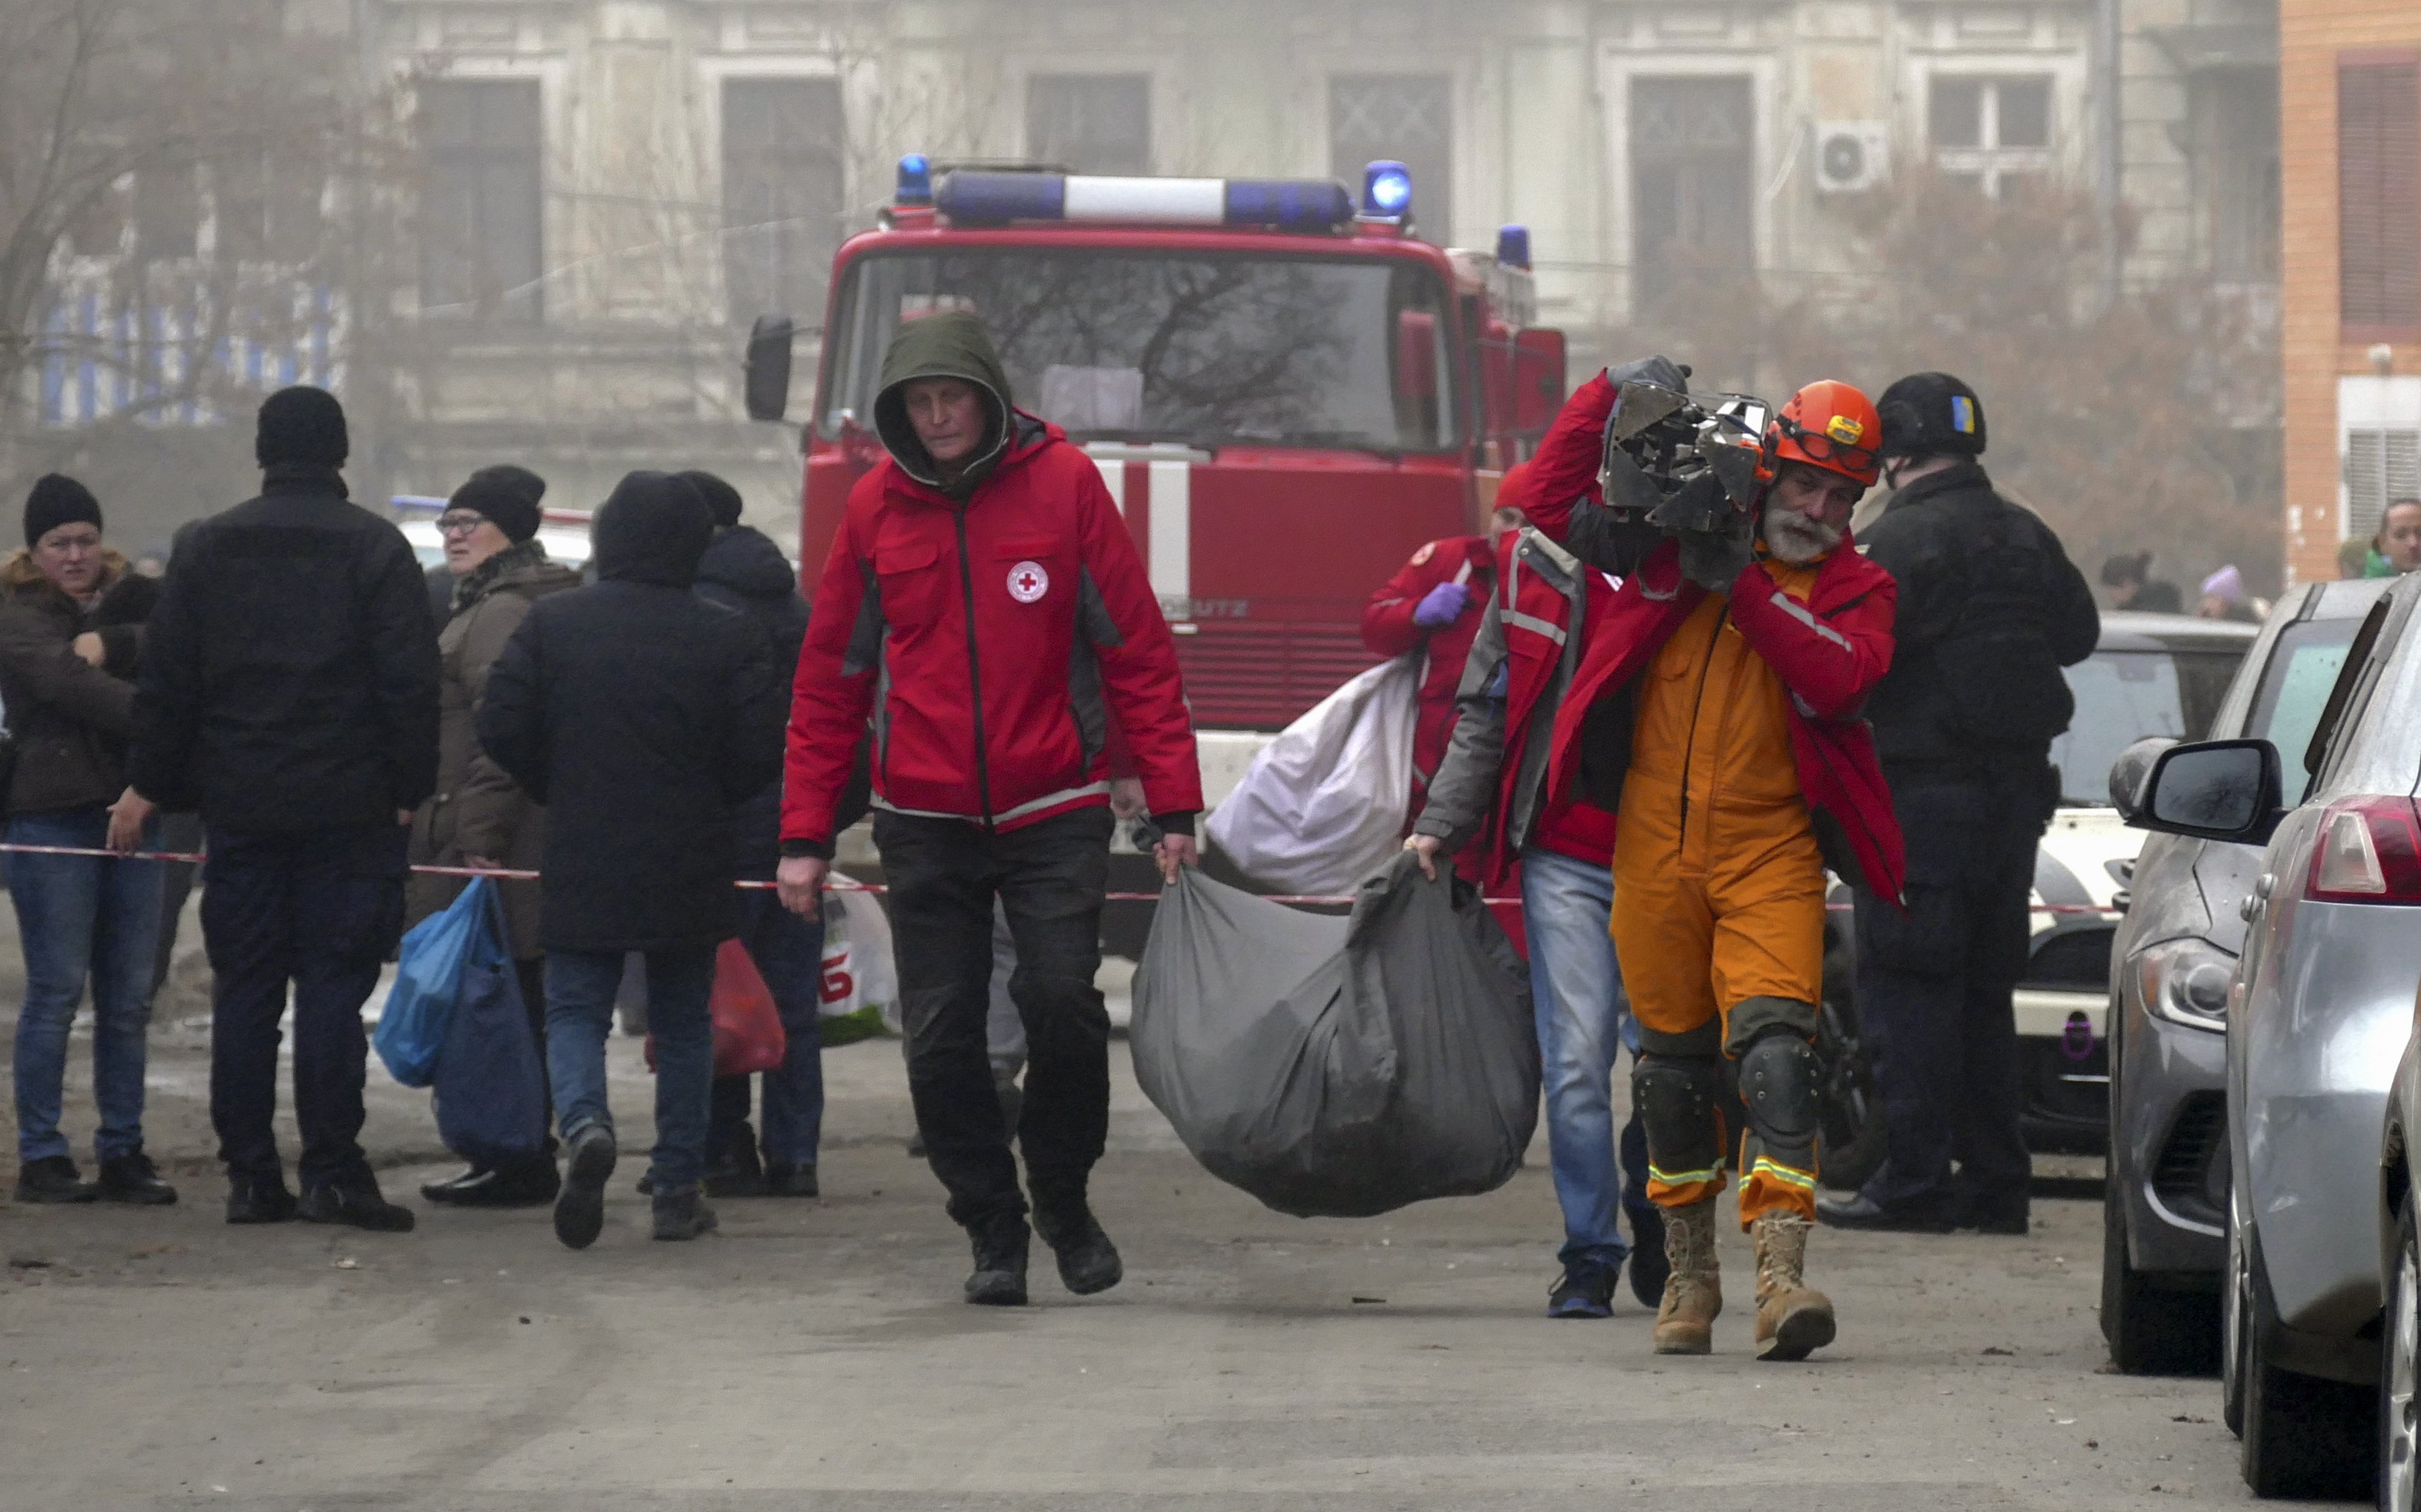 epa11048068 Ukrainian rescuers carry a bag from the site of a damaged building after shelling in Odesa, southwestern Ukraine, 29 December 2023, amid the Russian invasion. At least 18 people have died and over 130 were injured after Russia launched a wave of airstrikes across Ukraine, Ukraine’s Ministry of Internal Affairs said on 29 December. Strikes were reported in Kyiv, Lviv, Odesa, Dnipro, Kharkiv, Zaporizhzhia, and other Ukrainian cities. Russia launched ‘more than 150 missiles and combat drones’ at Ukrainian cities, Ukraine’s Prosecutor General Andriy Kostin said in a statement, adding that extensive damage included residential buildings, educational institutions and hospitals. Russian troops entered Ukraine on 24 February 2022 starting a conflict that has provoked destruction and a humanitarian crisis.  EPA-EFE/IGOR TKACHENKO